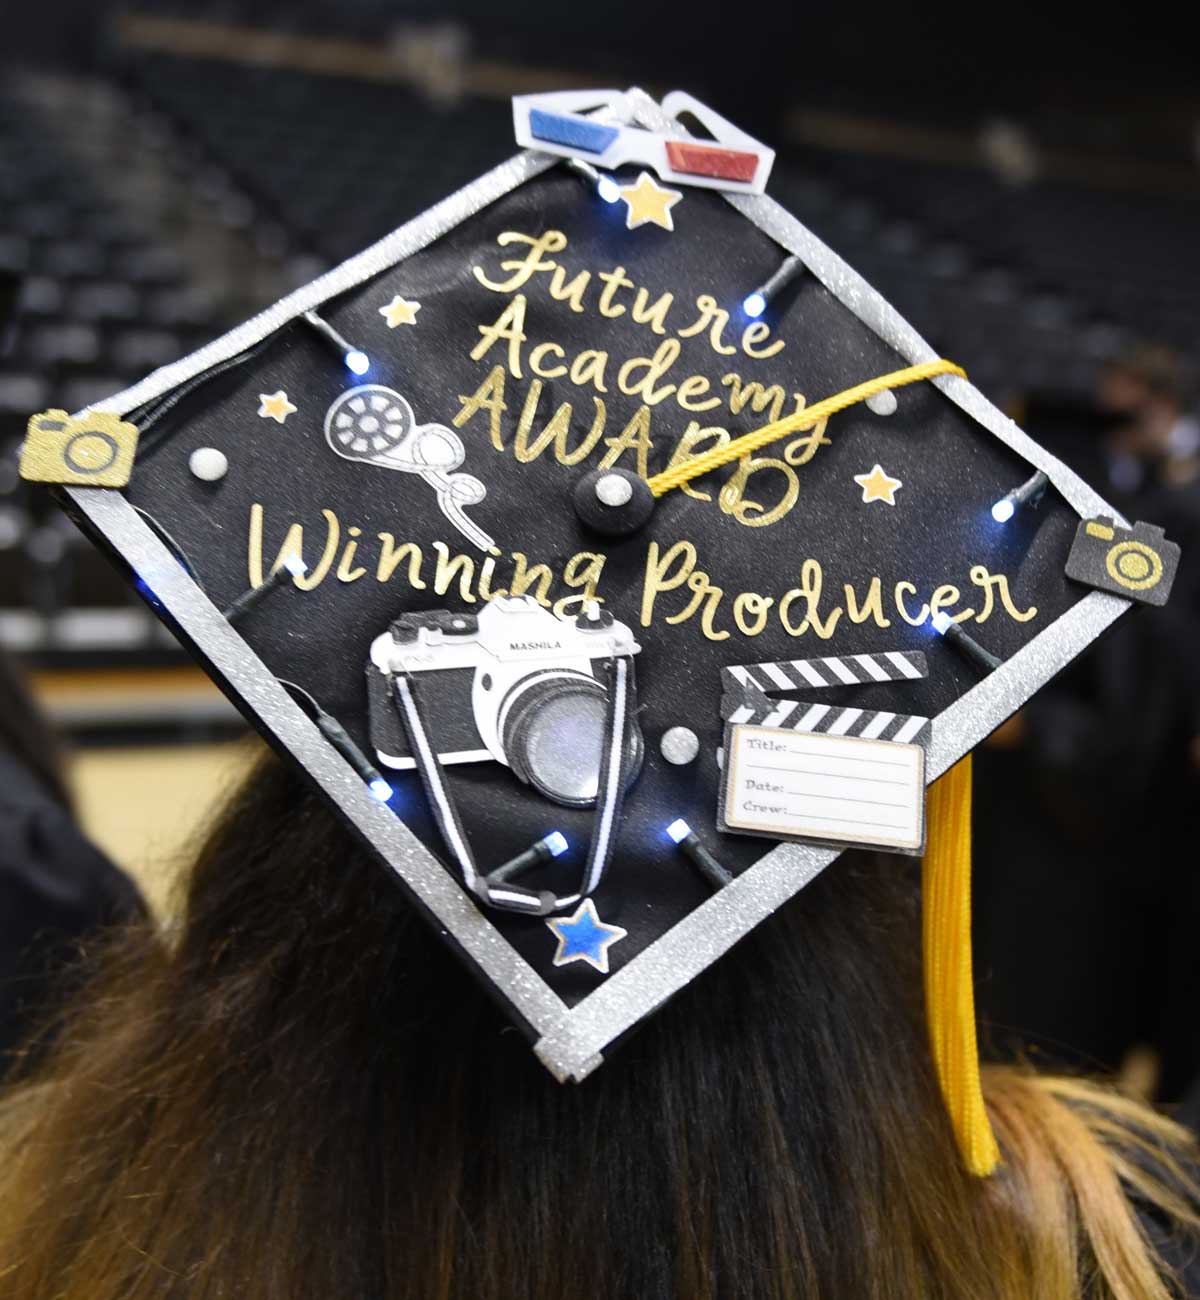 Grad cap decorated with text: Future Academy Award winning producer